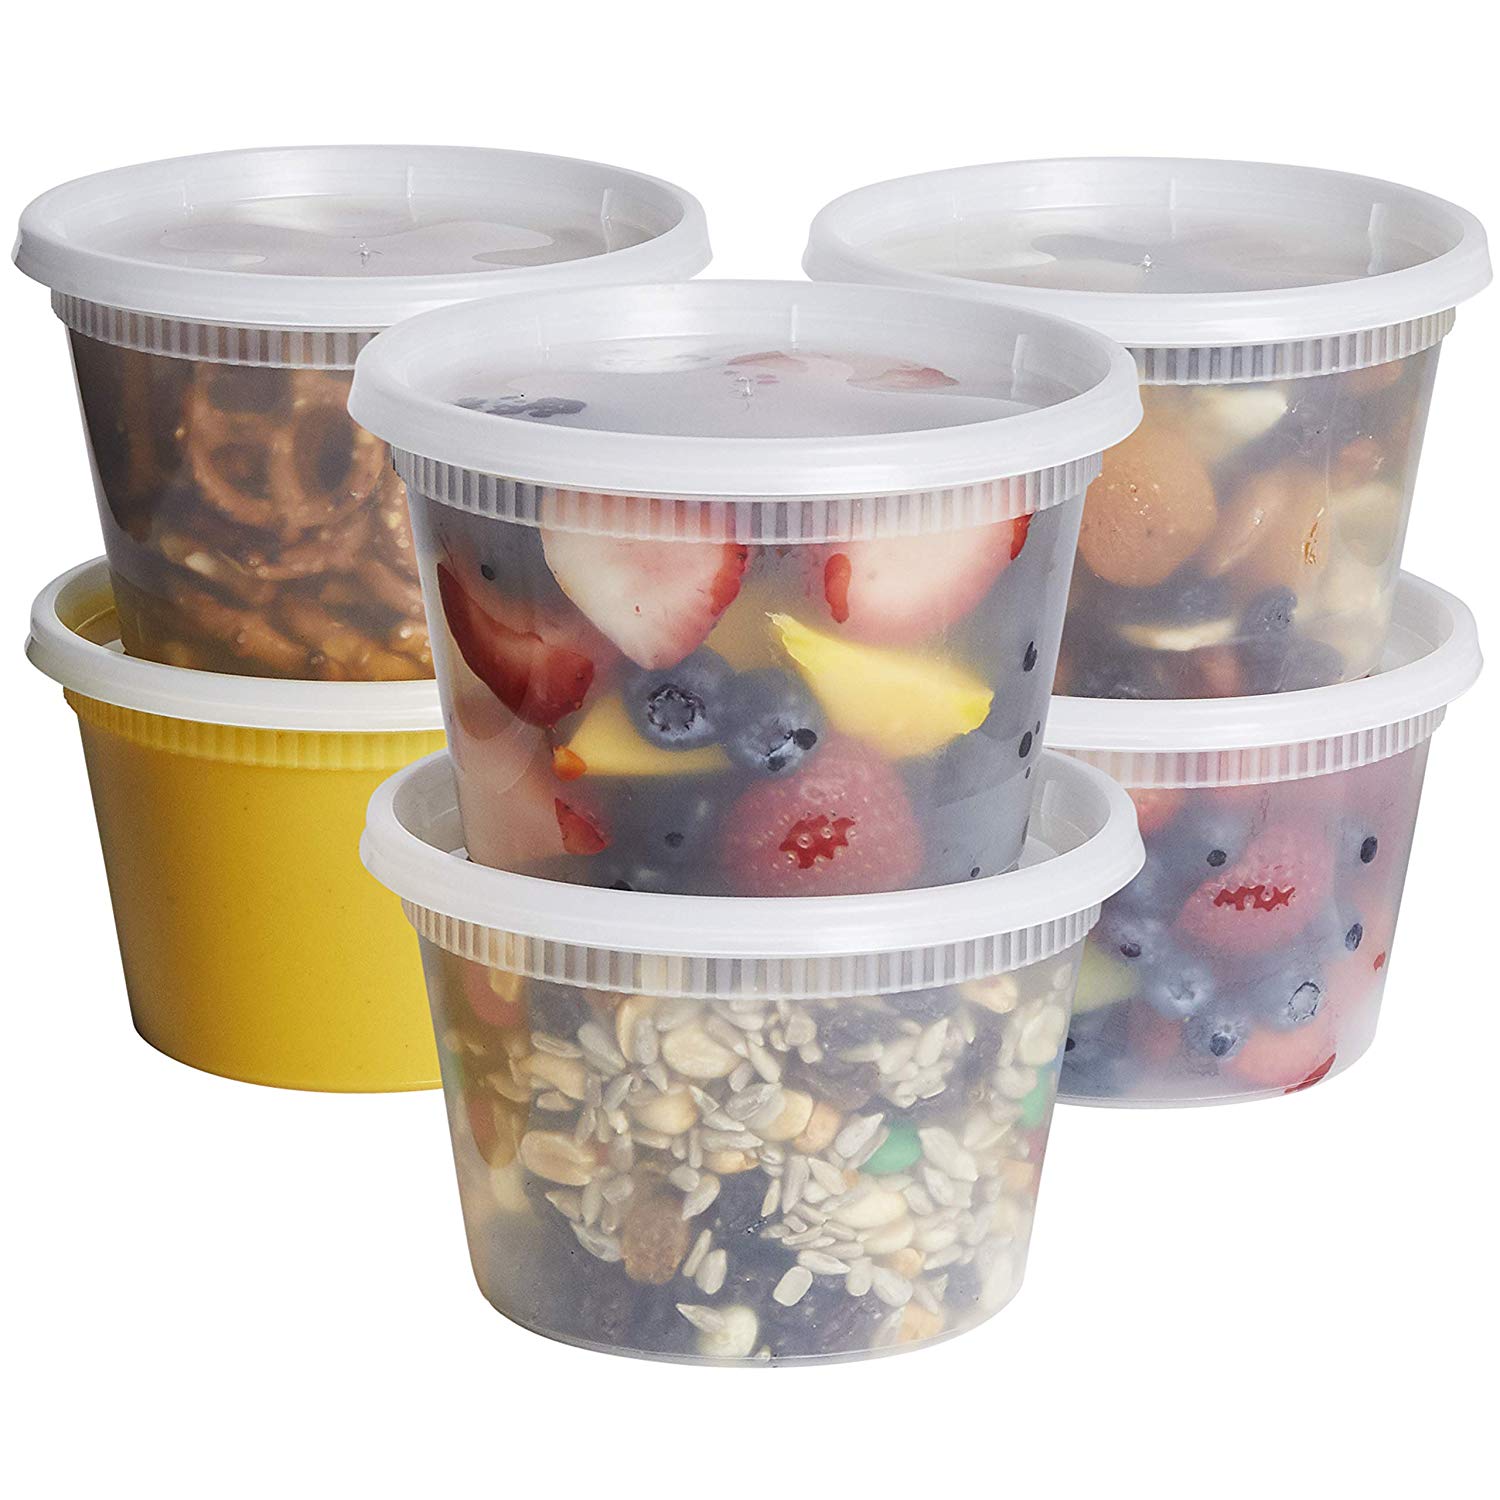 Pantry Value 24 Oz Deli Containers with Lids Food Prep Containers, 24-Pack